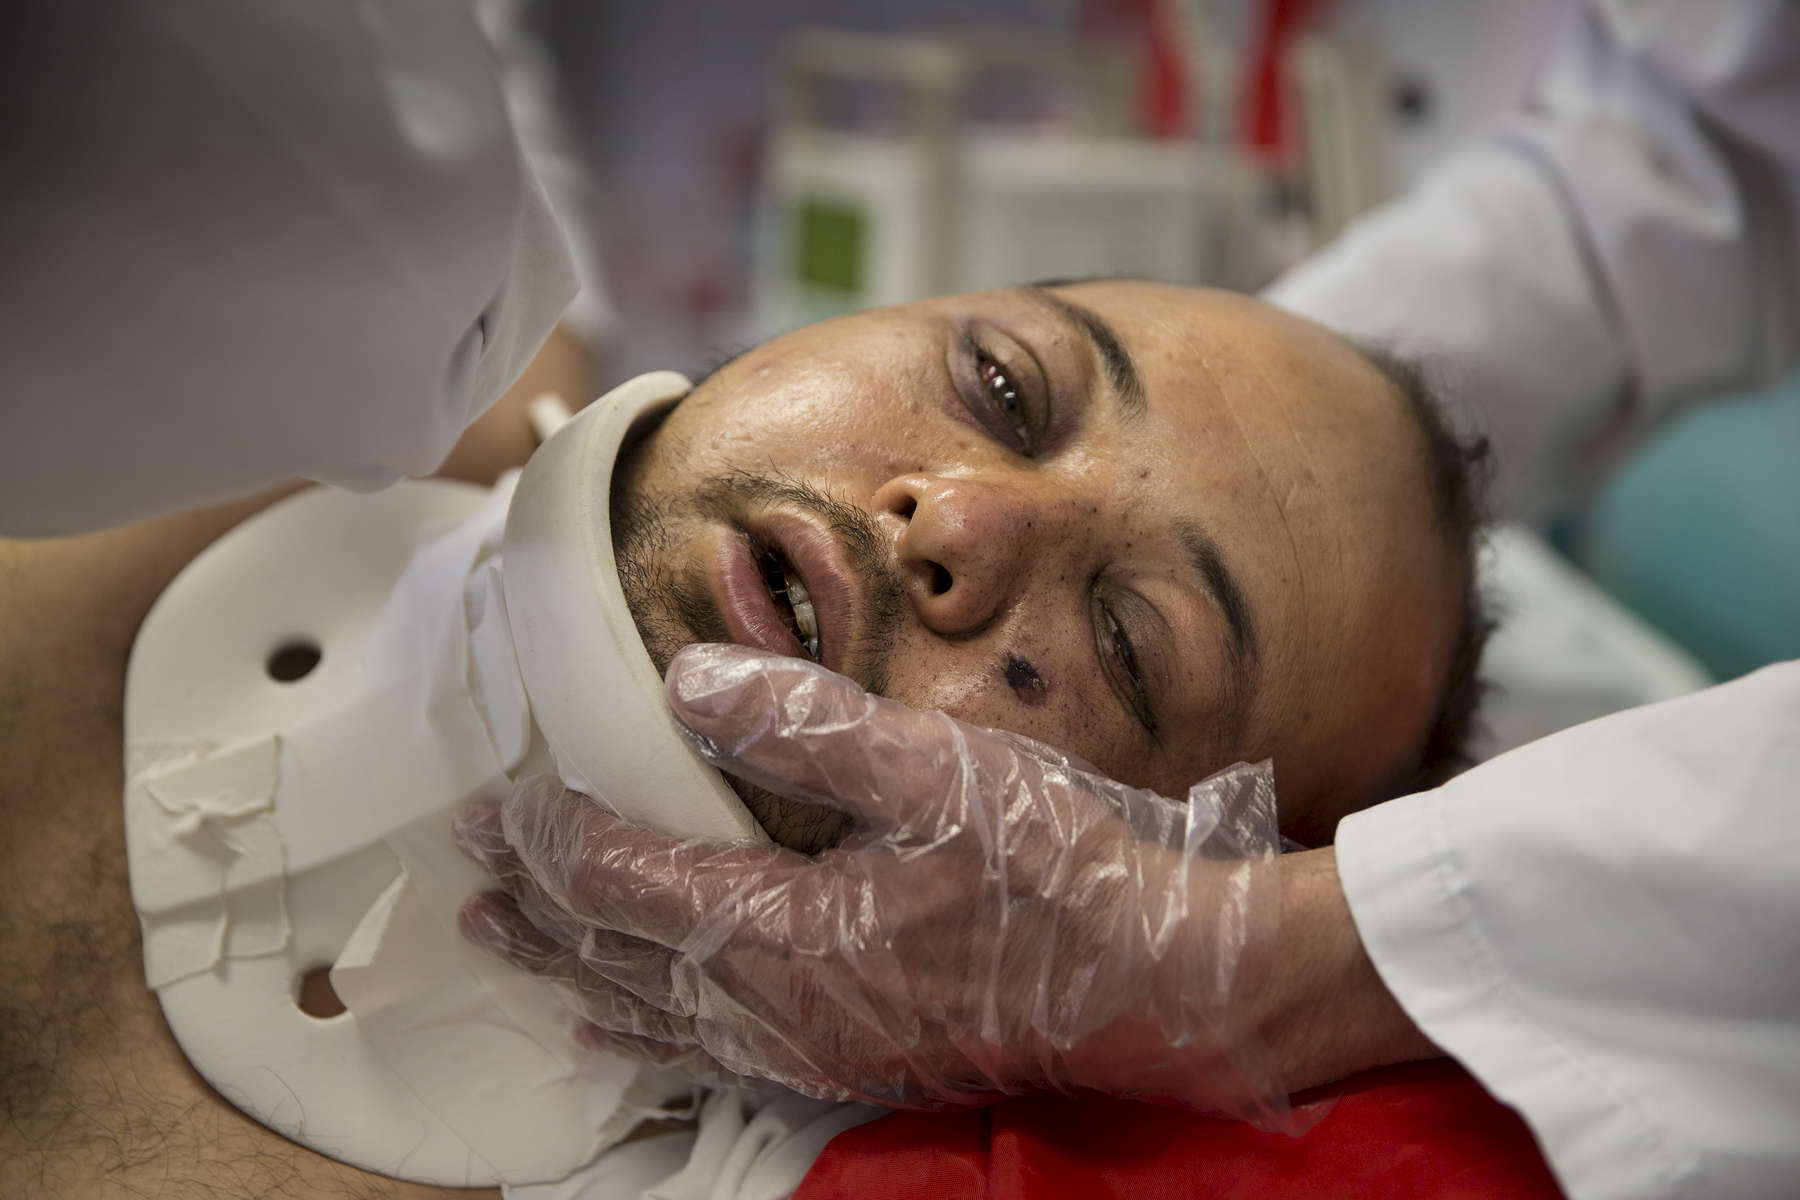 KABUL, AFGHANISTAN -MARCH 21, 2016: Azim, 25, a a quadriplegic who suffered bullet wounds to his face gets shifted to his side by medical staff at the Emergency hospital in Kabul on March 21, 2016. Every year the UN comes out with their report documenting the unfortunate carnage from America’s longest and most costly war in history. Along with the price tag estimated in the hundreds of billions, the human toll from a 2015 UN Assistance Mission To Afghanistan (UNAMA) report stated the number of Afghan civilians killed and wounded surpassed 11,000.  which was the deadliest on record for civilians in Afghanistan since the US-led invasion more than 14 years ago. 